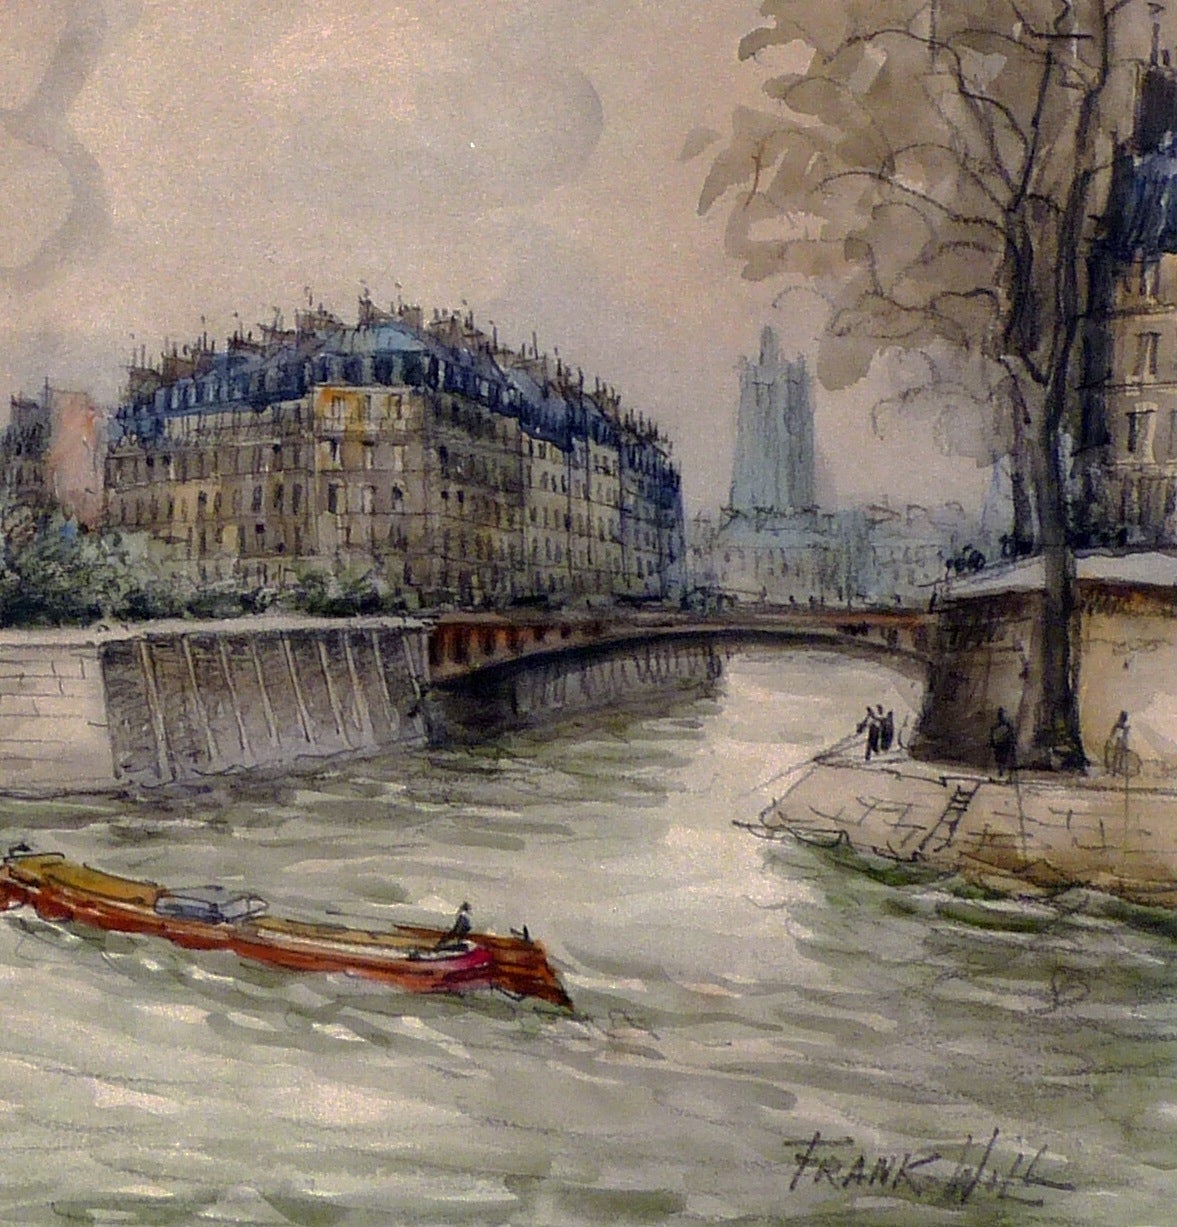 Notre-Dame and the Seine - Art by Frank Will